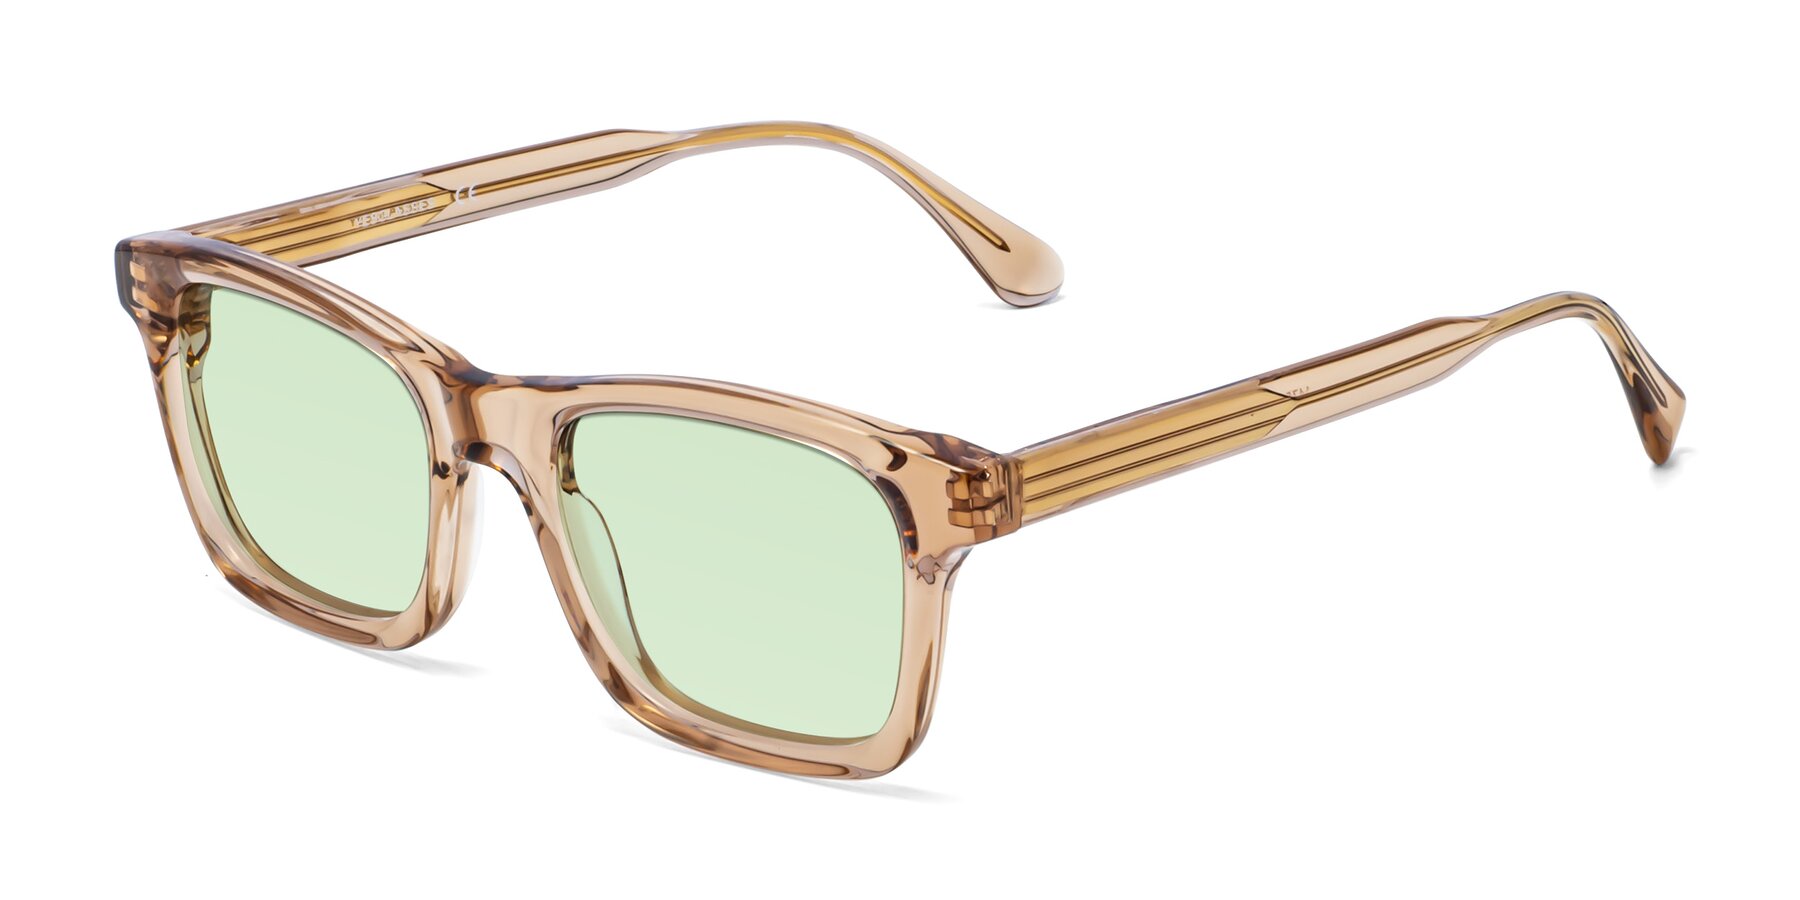 Angle of 1475 in Caramel with Light Green Tinted Lenses